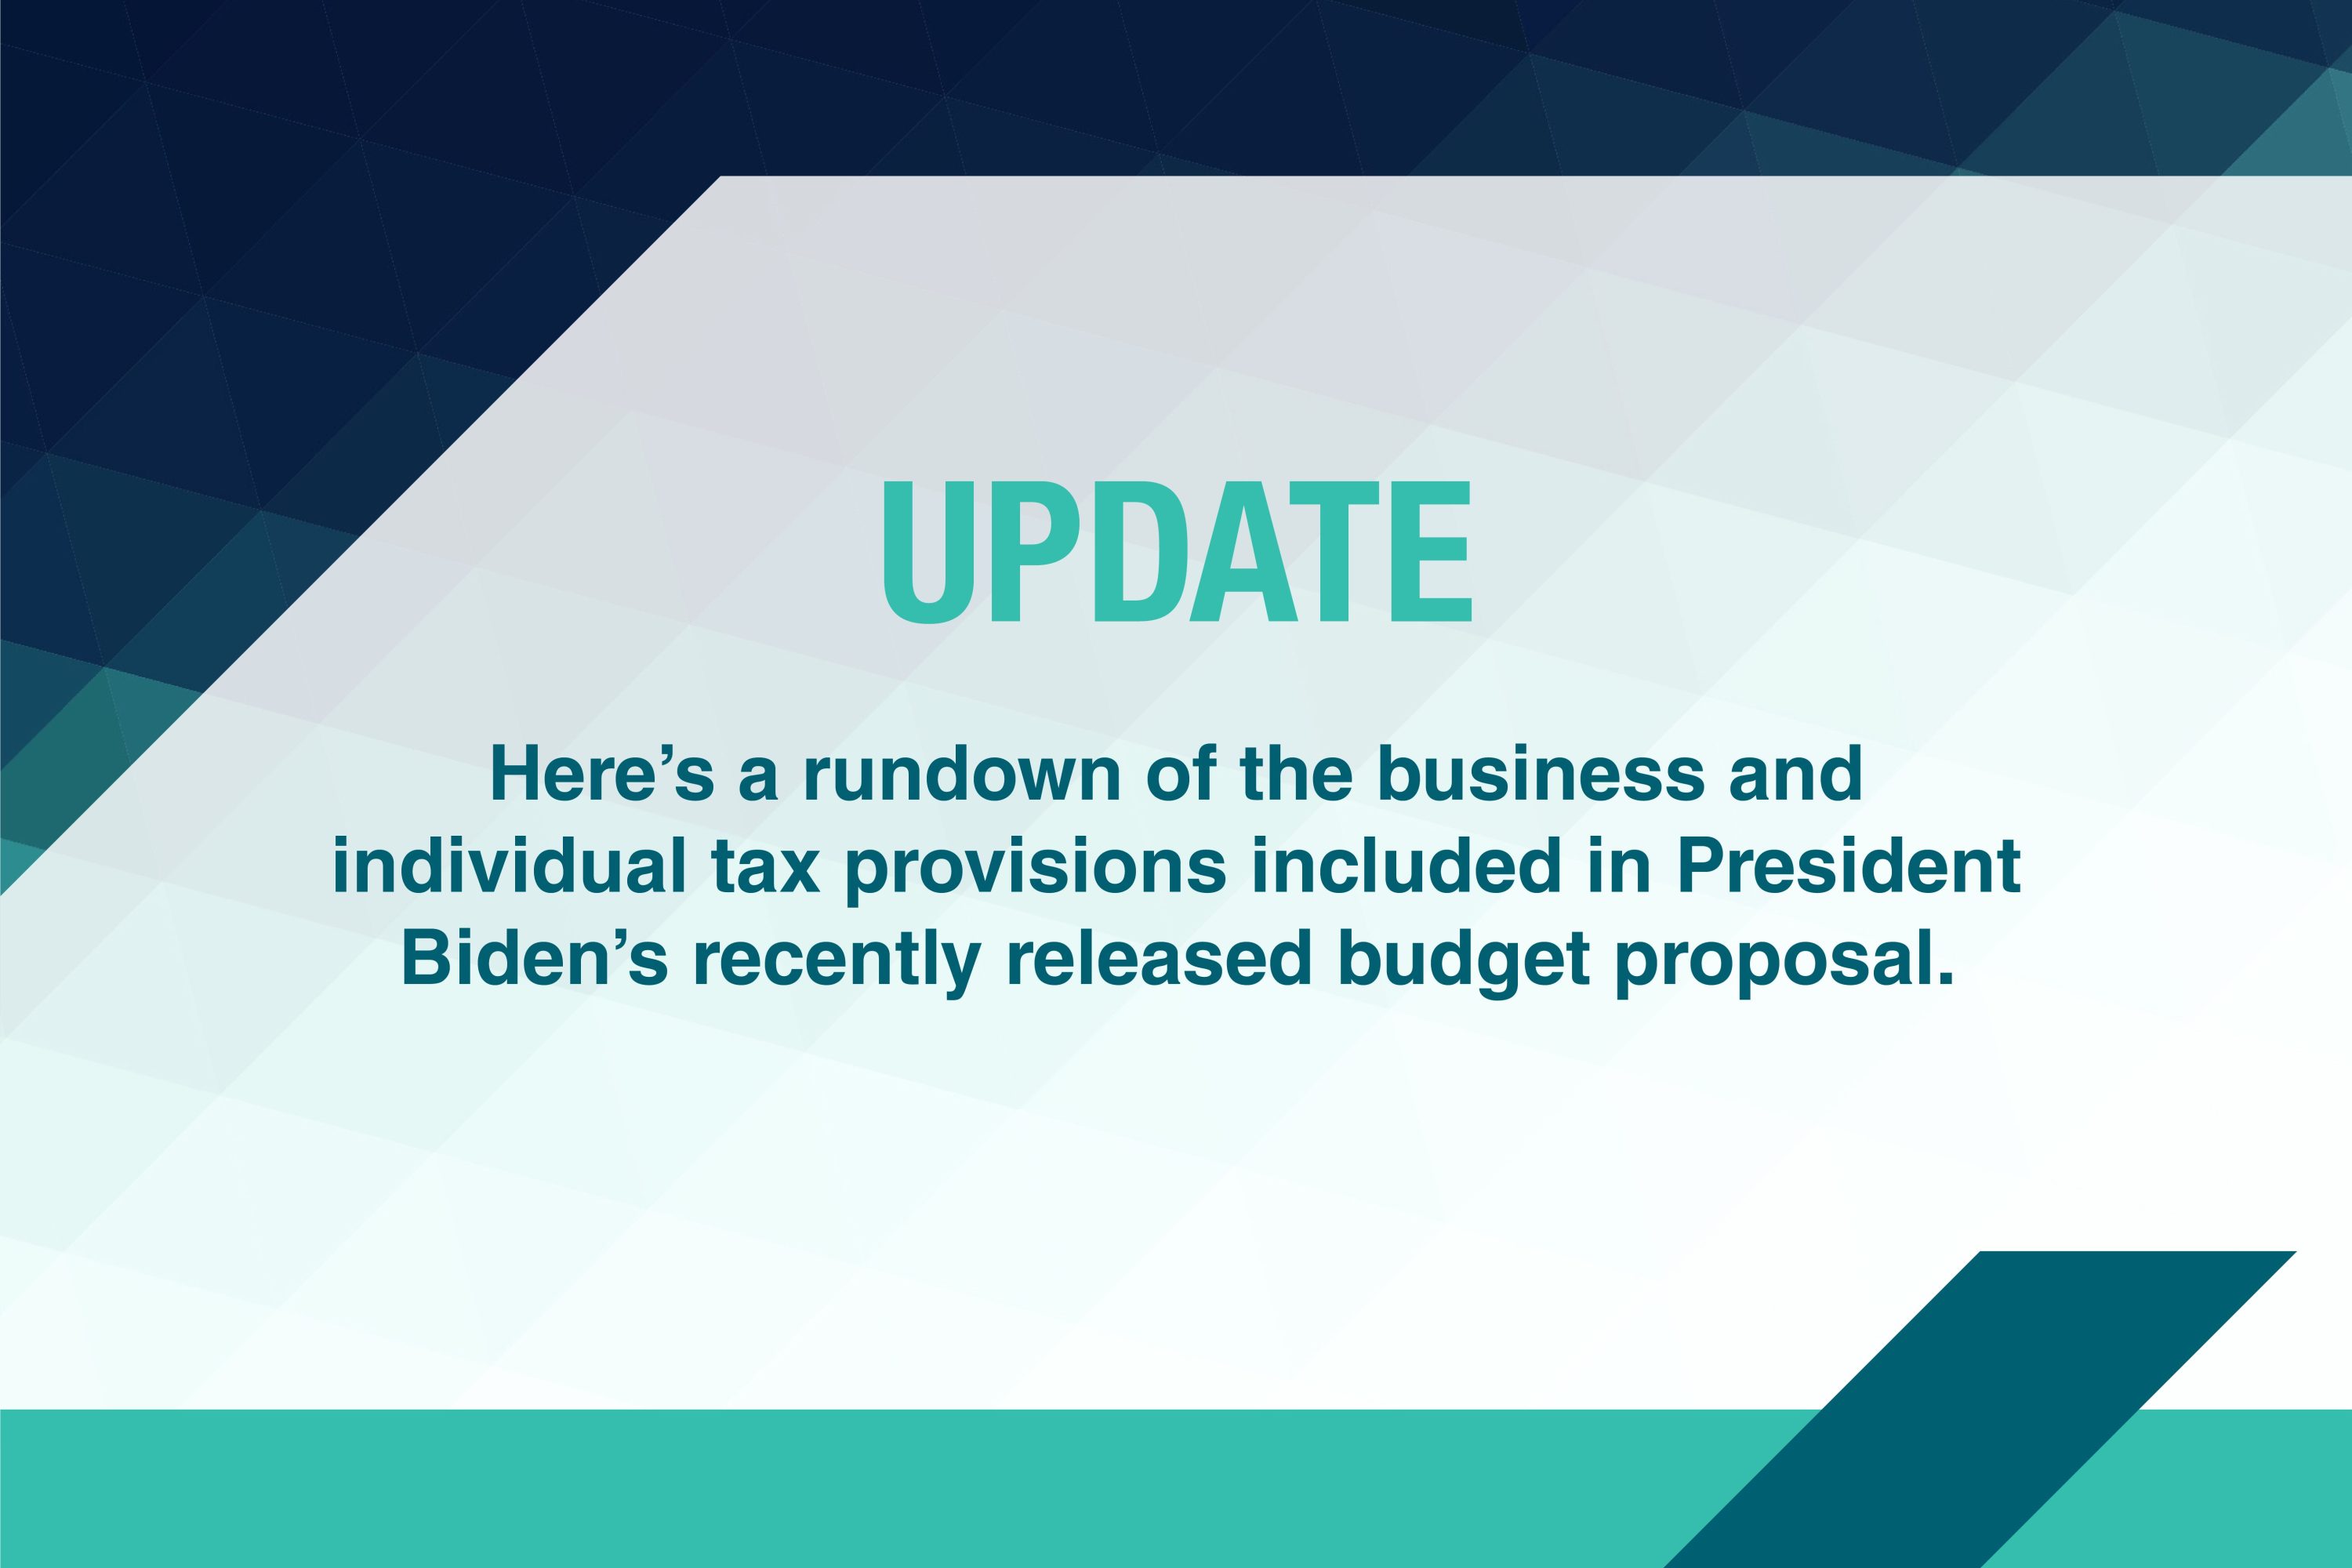 President Biden’s proposed budget includes notable tax provisions